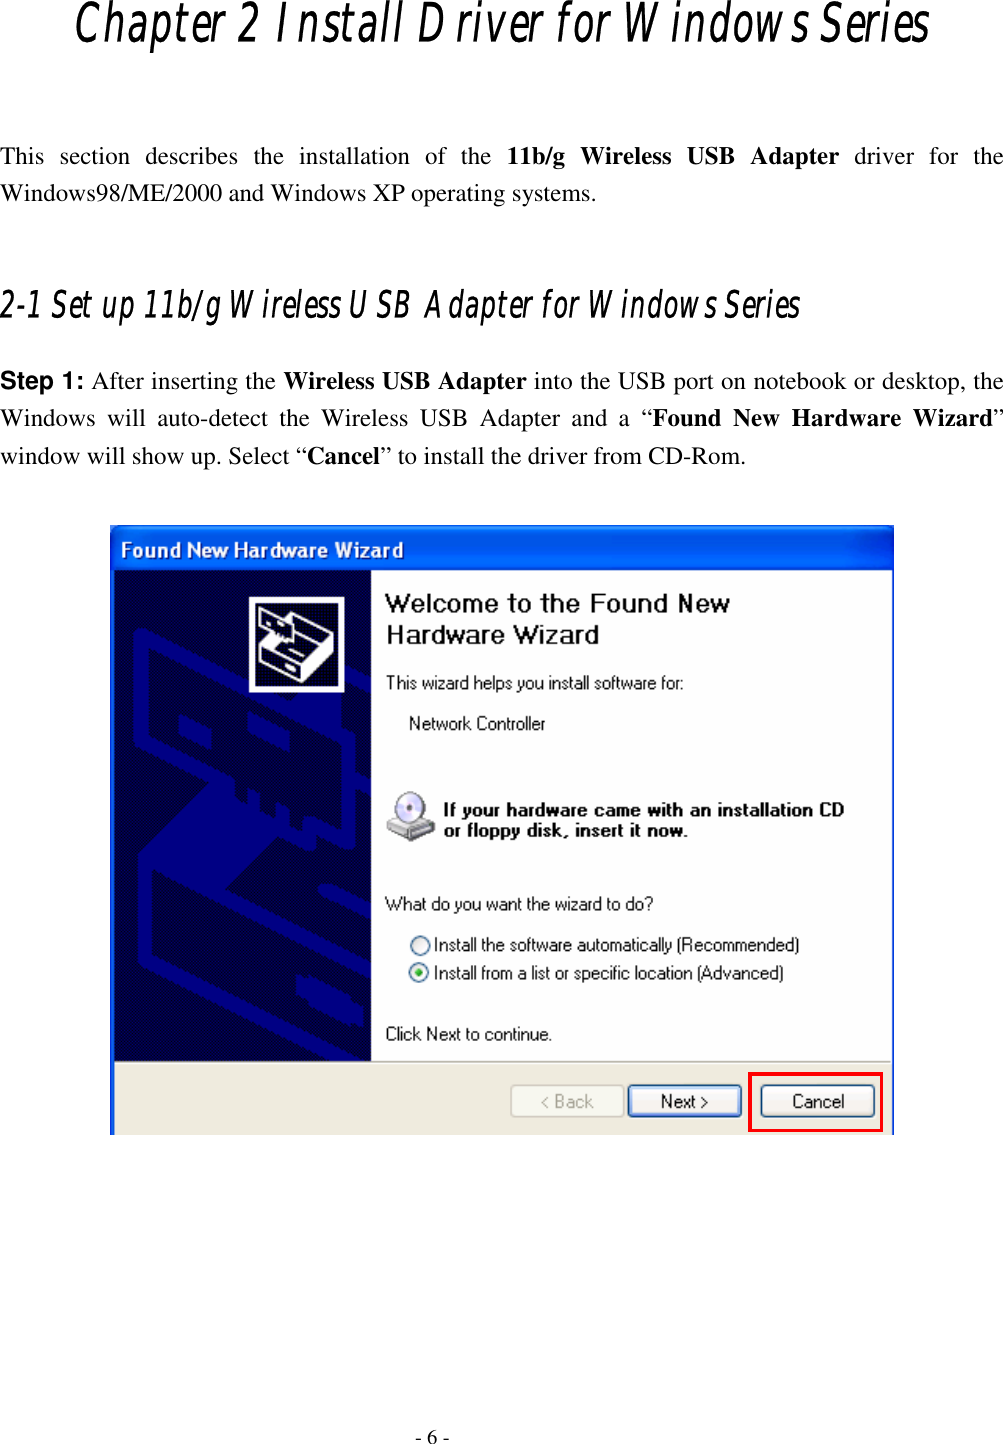    - 6 - Chapter 2 Install Driver for Windows Series  This section describes the installation of the 11b/g Wireless USB Adapter driver for the Windows98/ME/2000 and Windows XP operating systems.  2-1 Set up 11b/g Wireless USB Adapter for Windows Series Step 1: After inserting the Wireless USB Adapter into the USB port on notebook or desktop, the Windows will auto-detect the Wireless USB Adapter and a “Found New Hardware Wizard” window will show up. Select “Cancel” to install the driver from CD-Rom.         